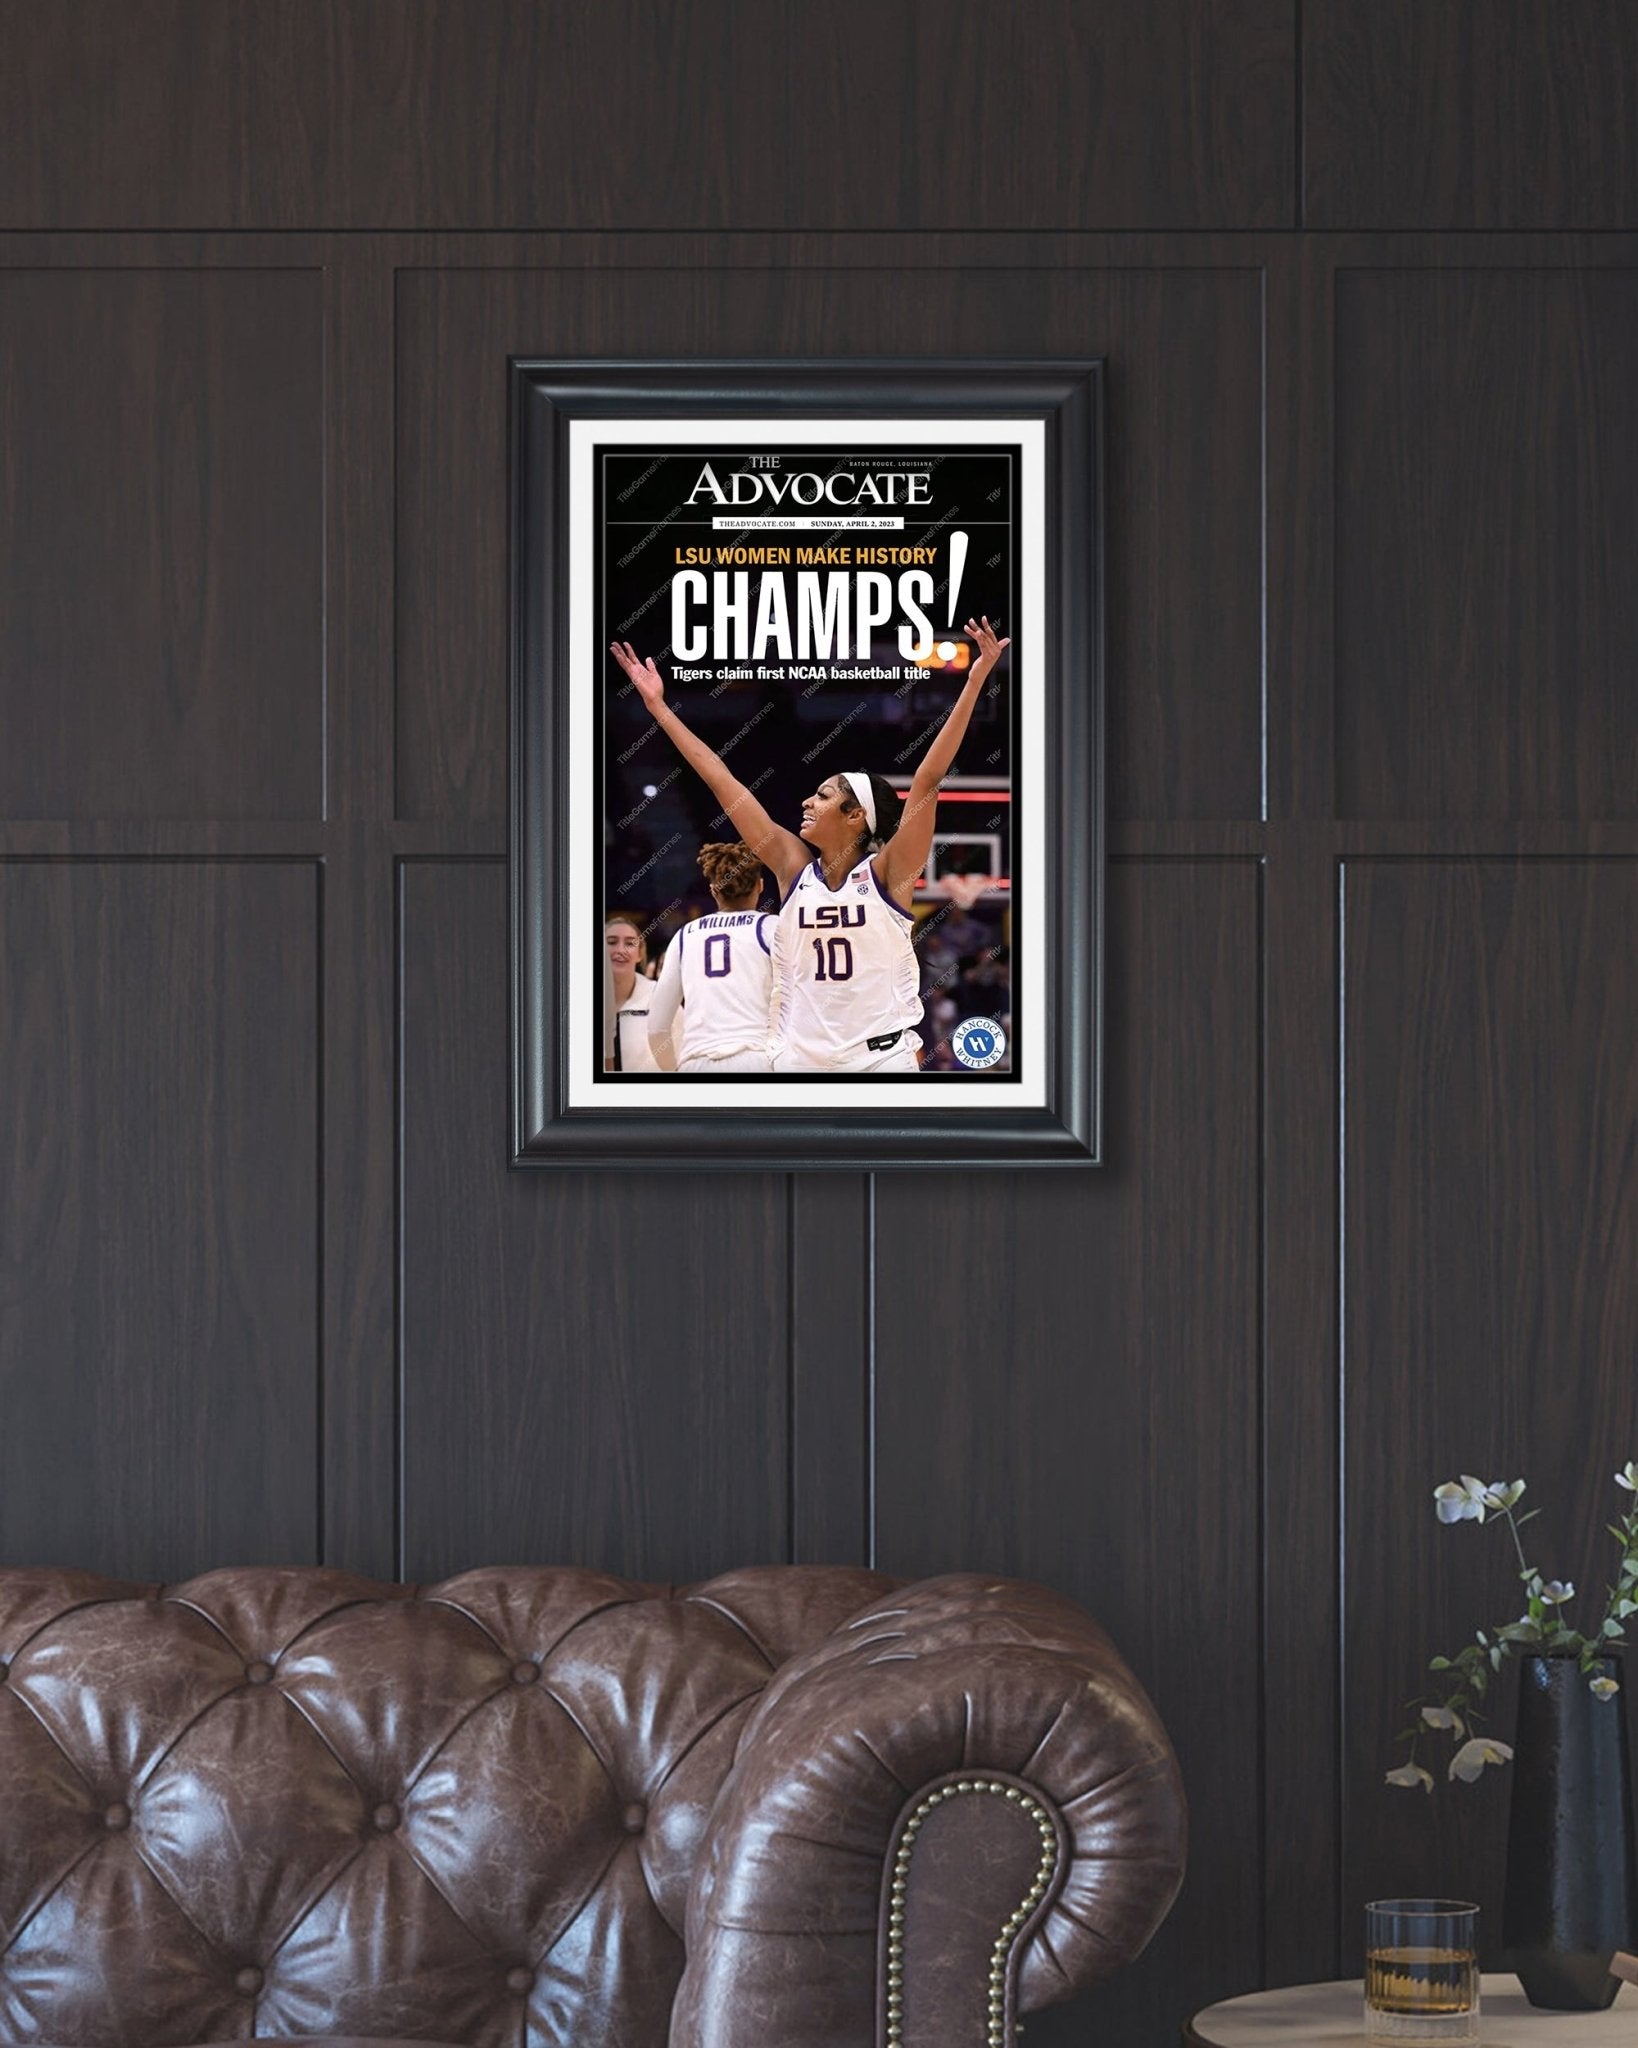 2023 LSU Tigers Women's National Champions Angel Reese "CHAMPS!" Framed Front Page Newspaper - Title Game Frames